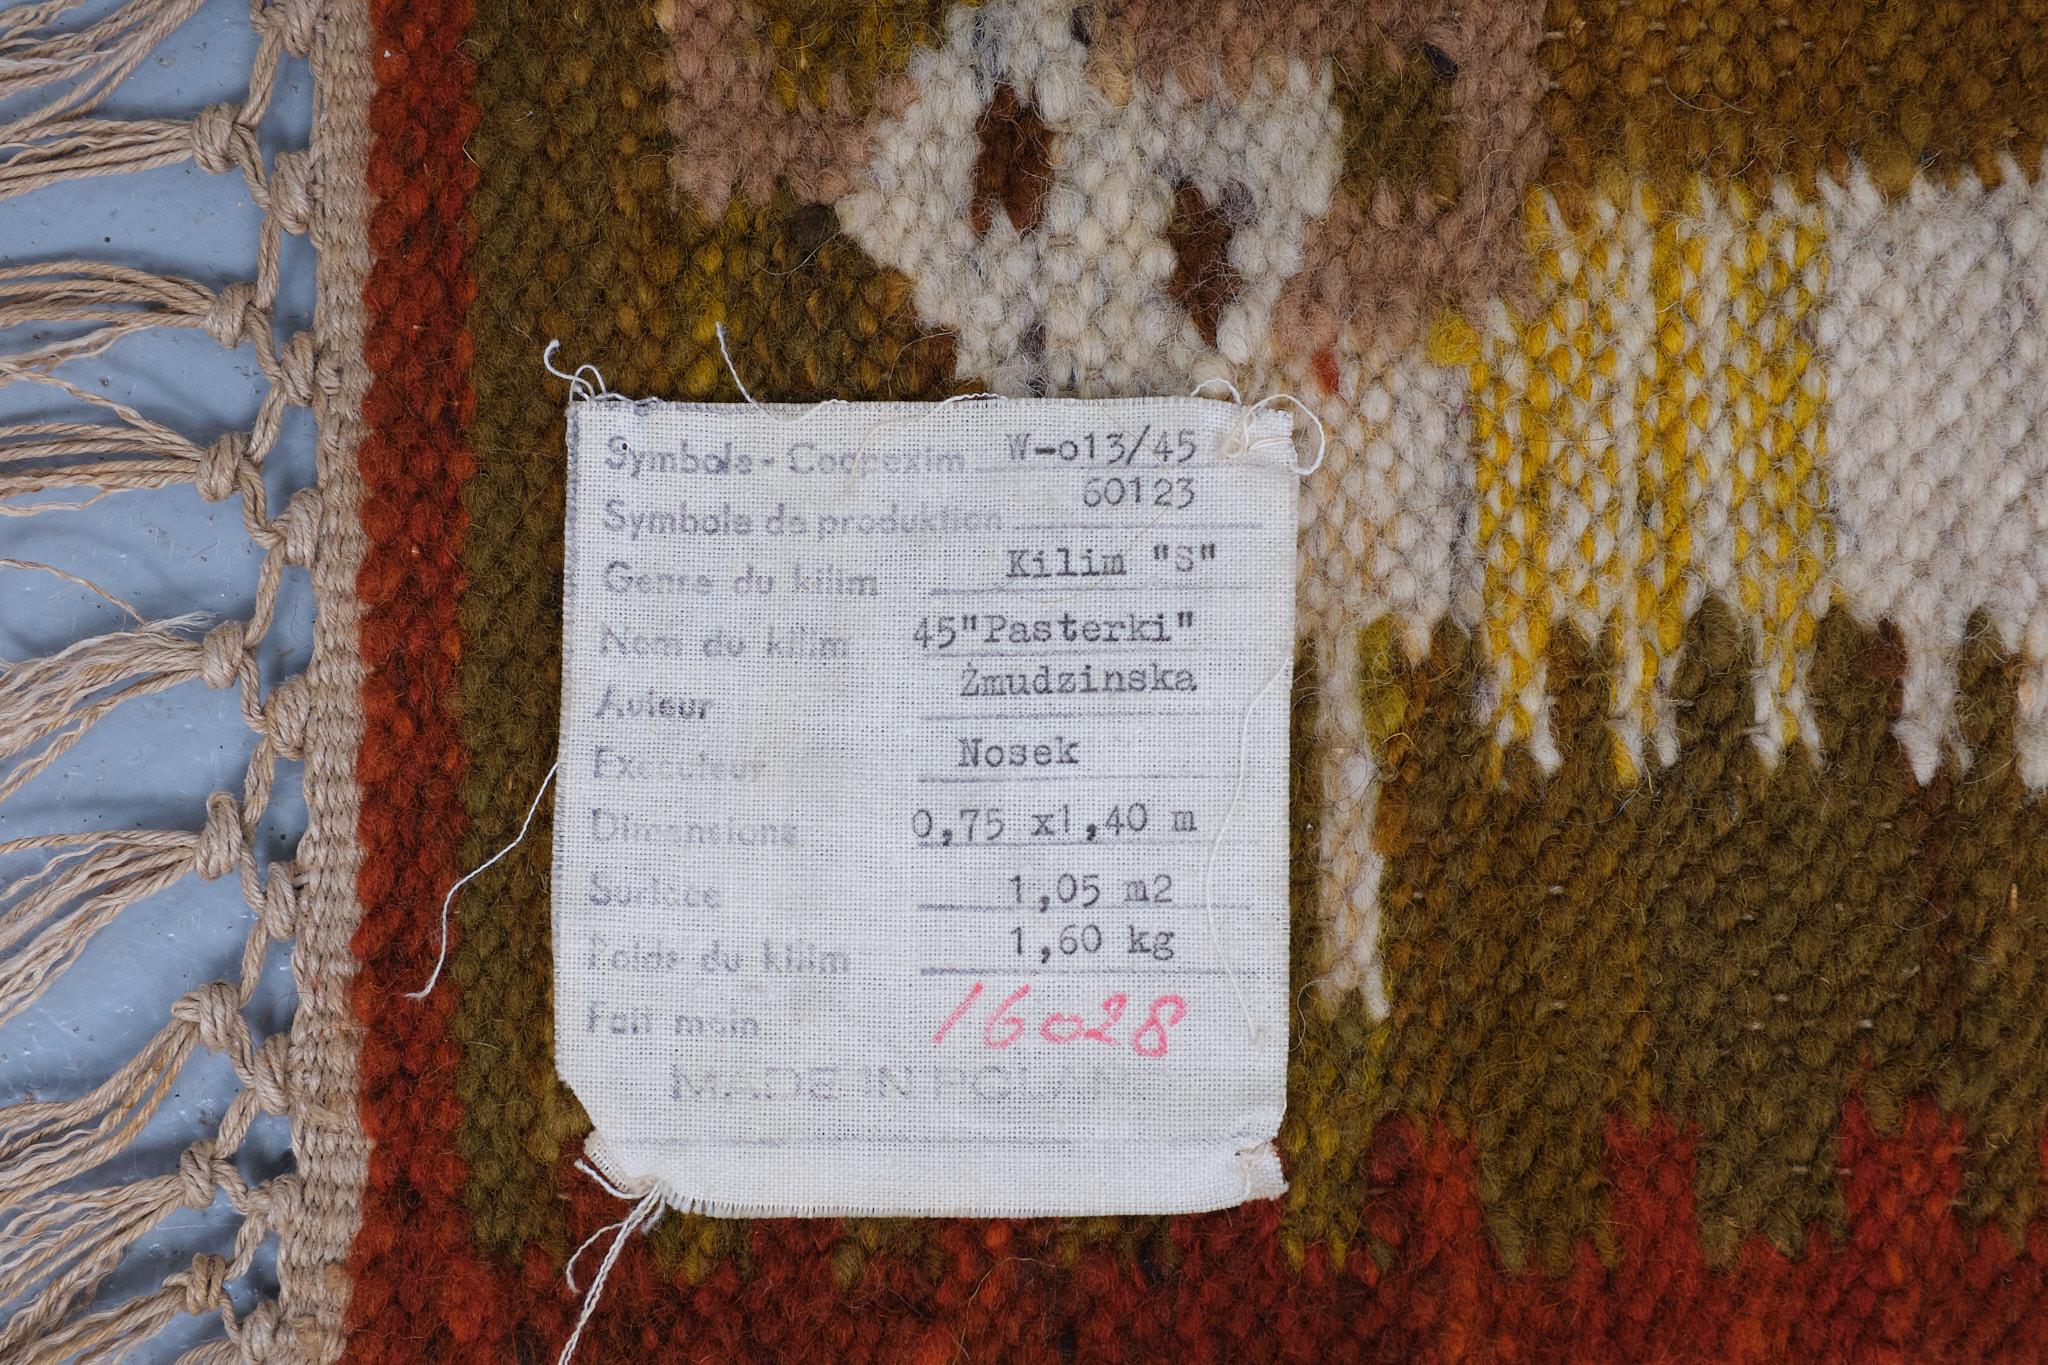 Hand knotted Kelim Tapestry   45 Pasterki   1960s Poland  1